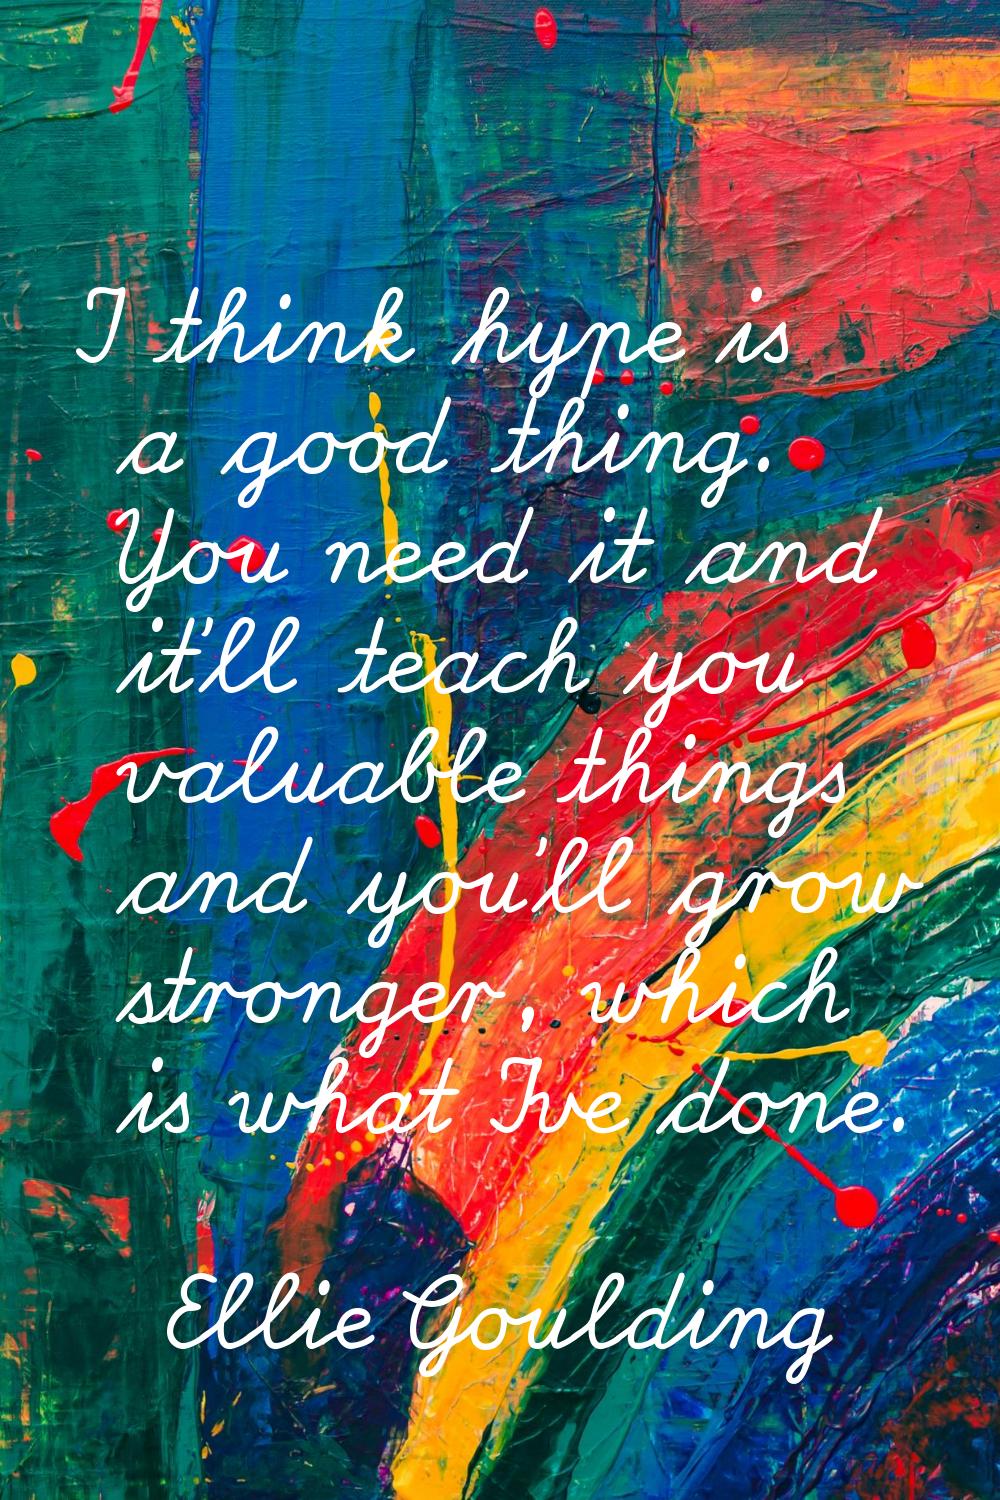 I think hype is a good thing. You need it and it'll teach you valuable things and you'll grow stron